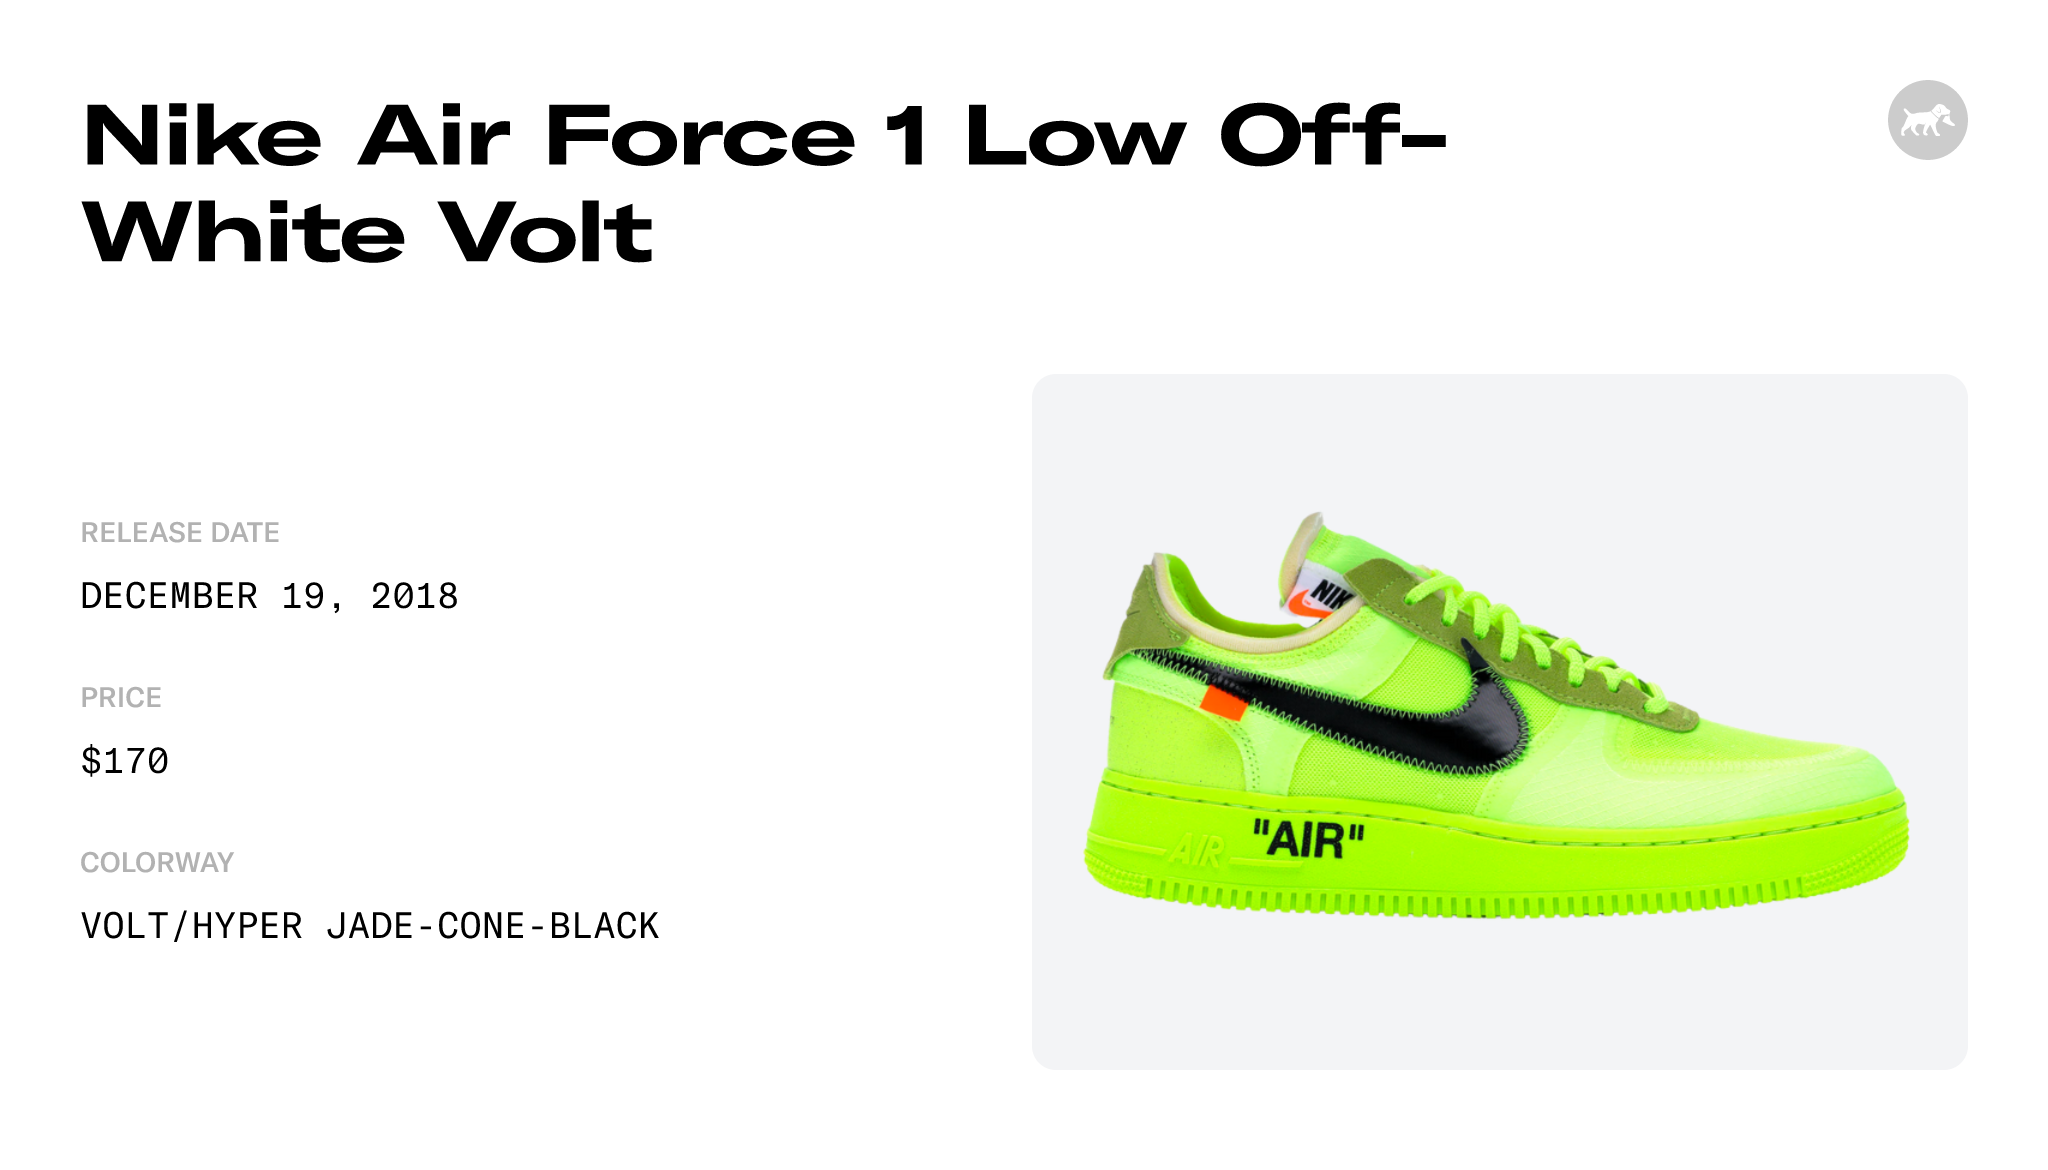 Nike Air Force 1 Low Off-White Volt - AO4606-700 Raffles and Release Date